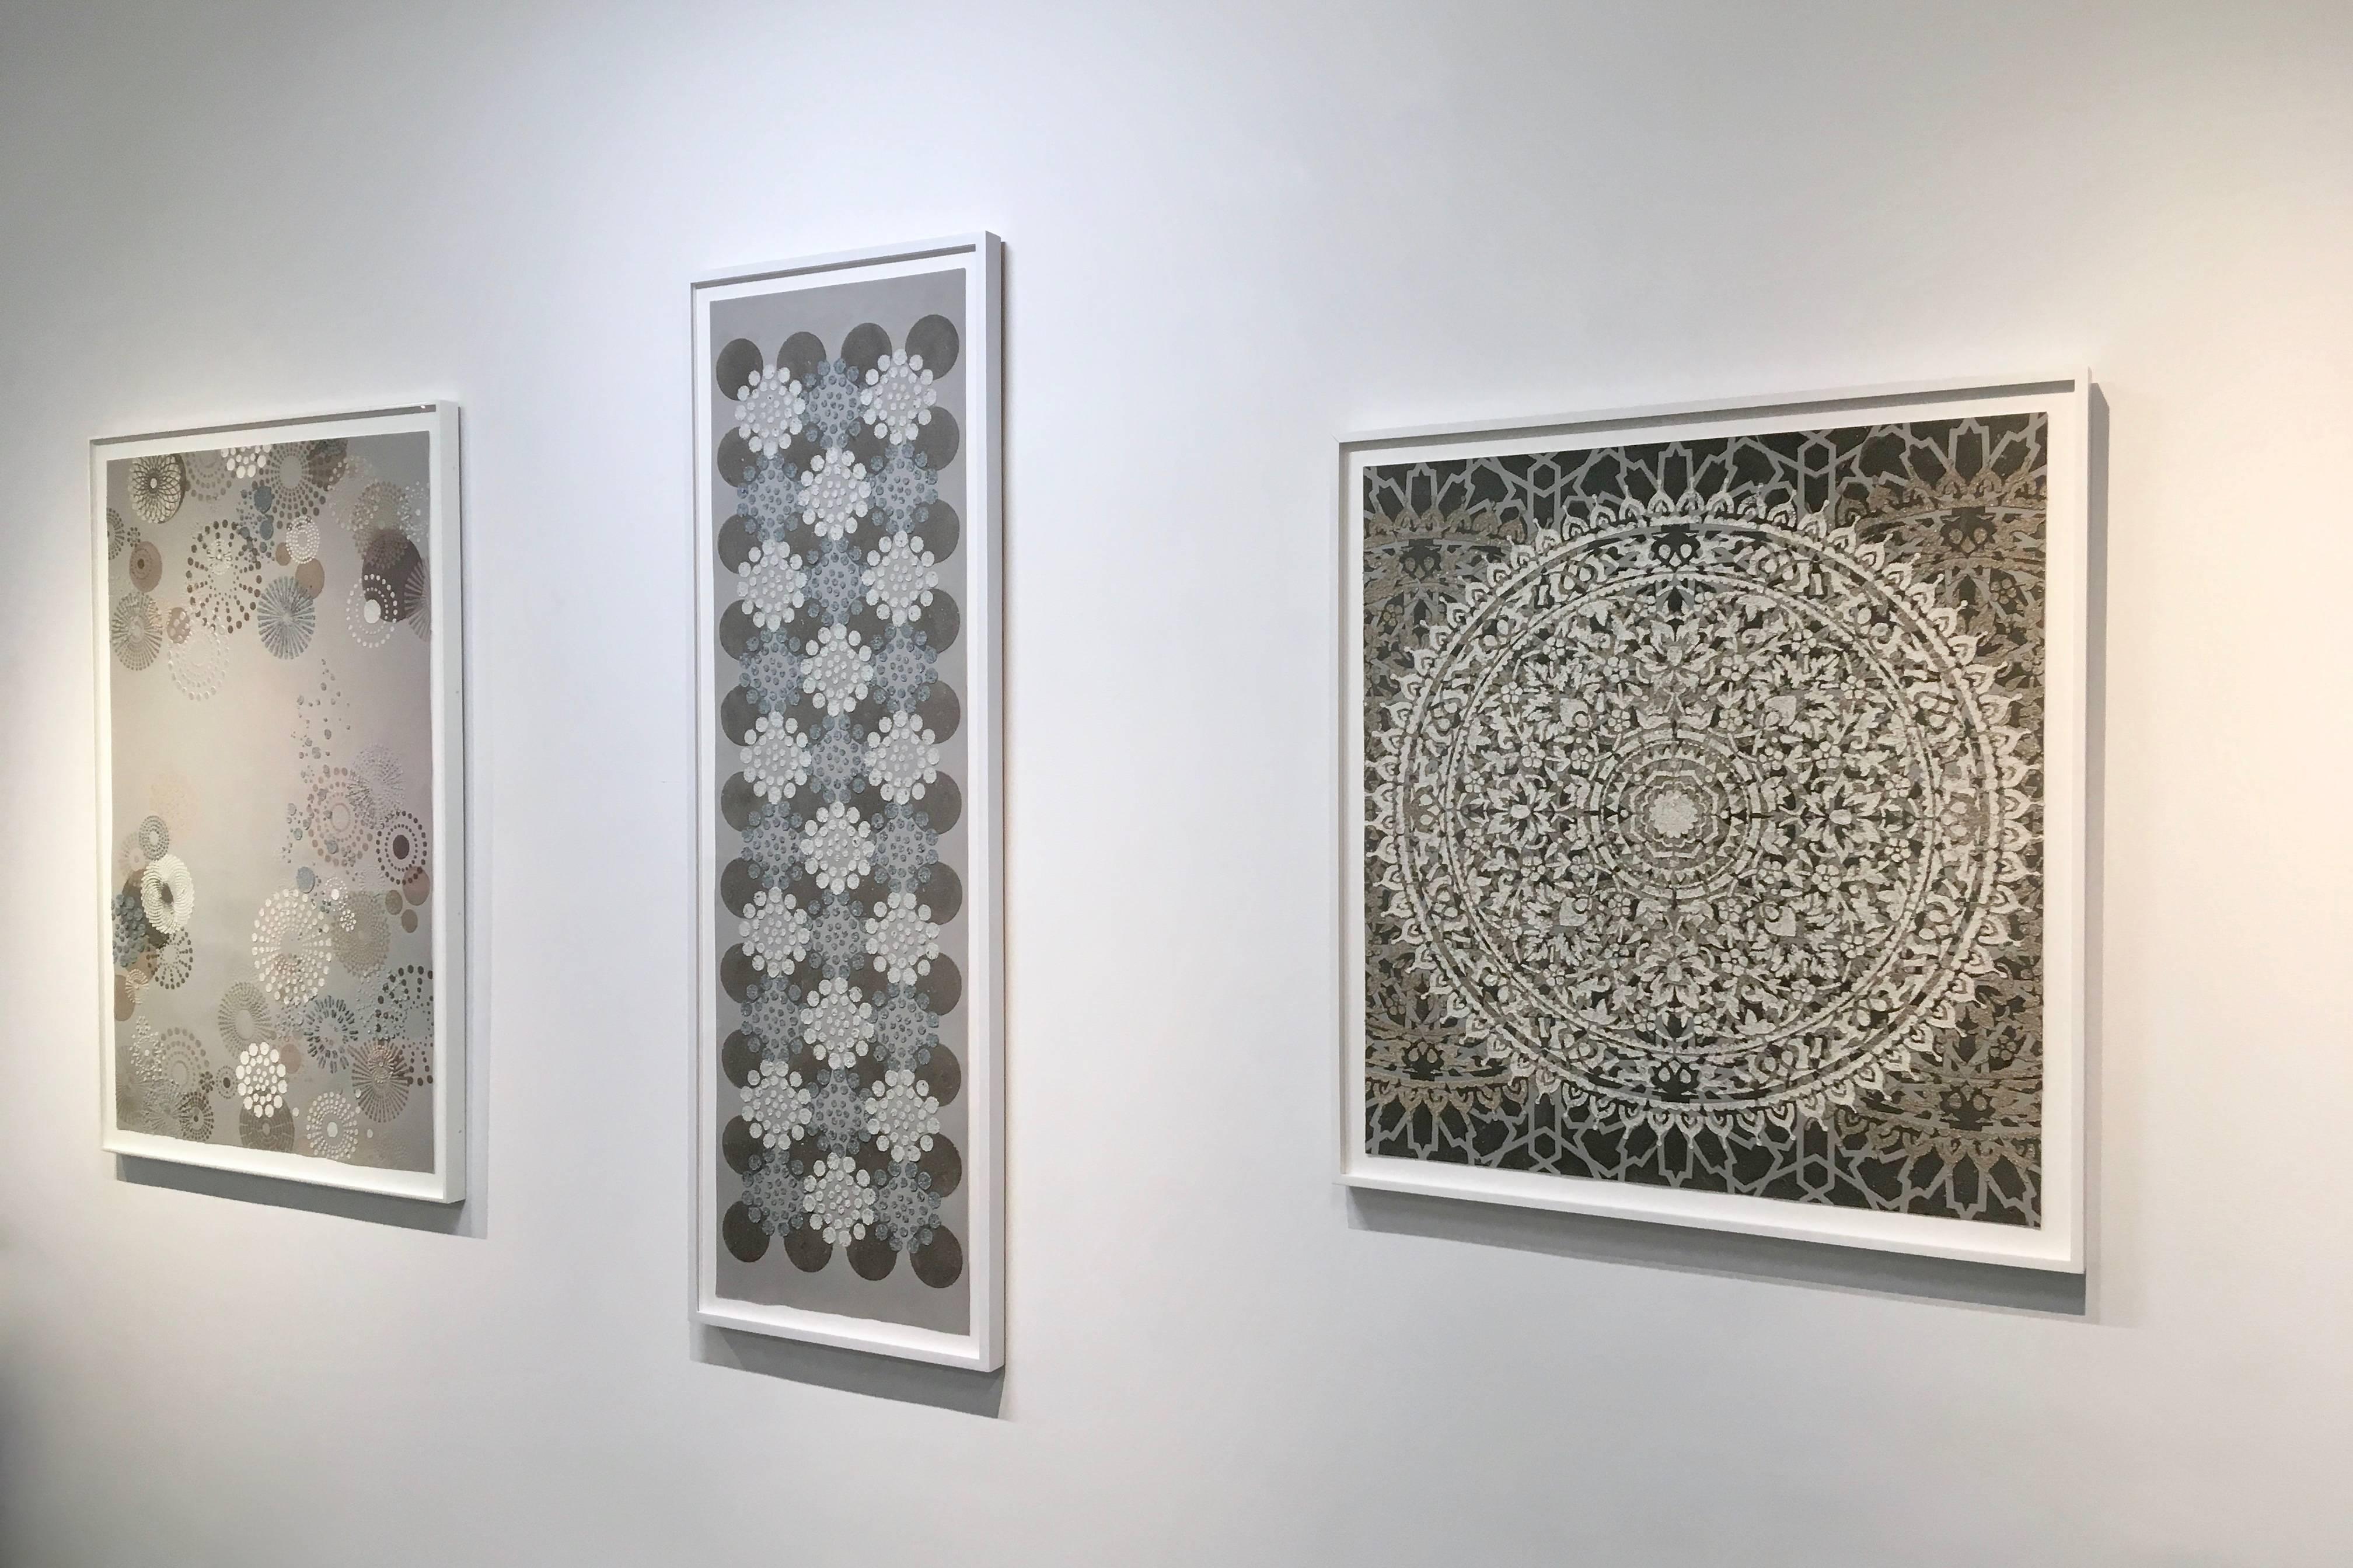 This long geometric abstract work on paper by Eleanore White can be hung either horizontally or vertically. It is a wonderful addition to a small wall or dark corner. The light, airy pops of non-traditional materials add texture and interest. Wood